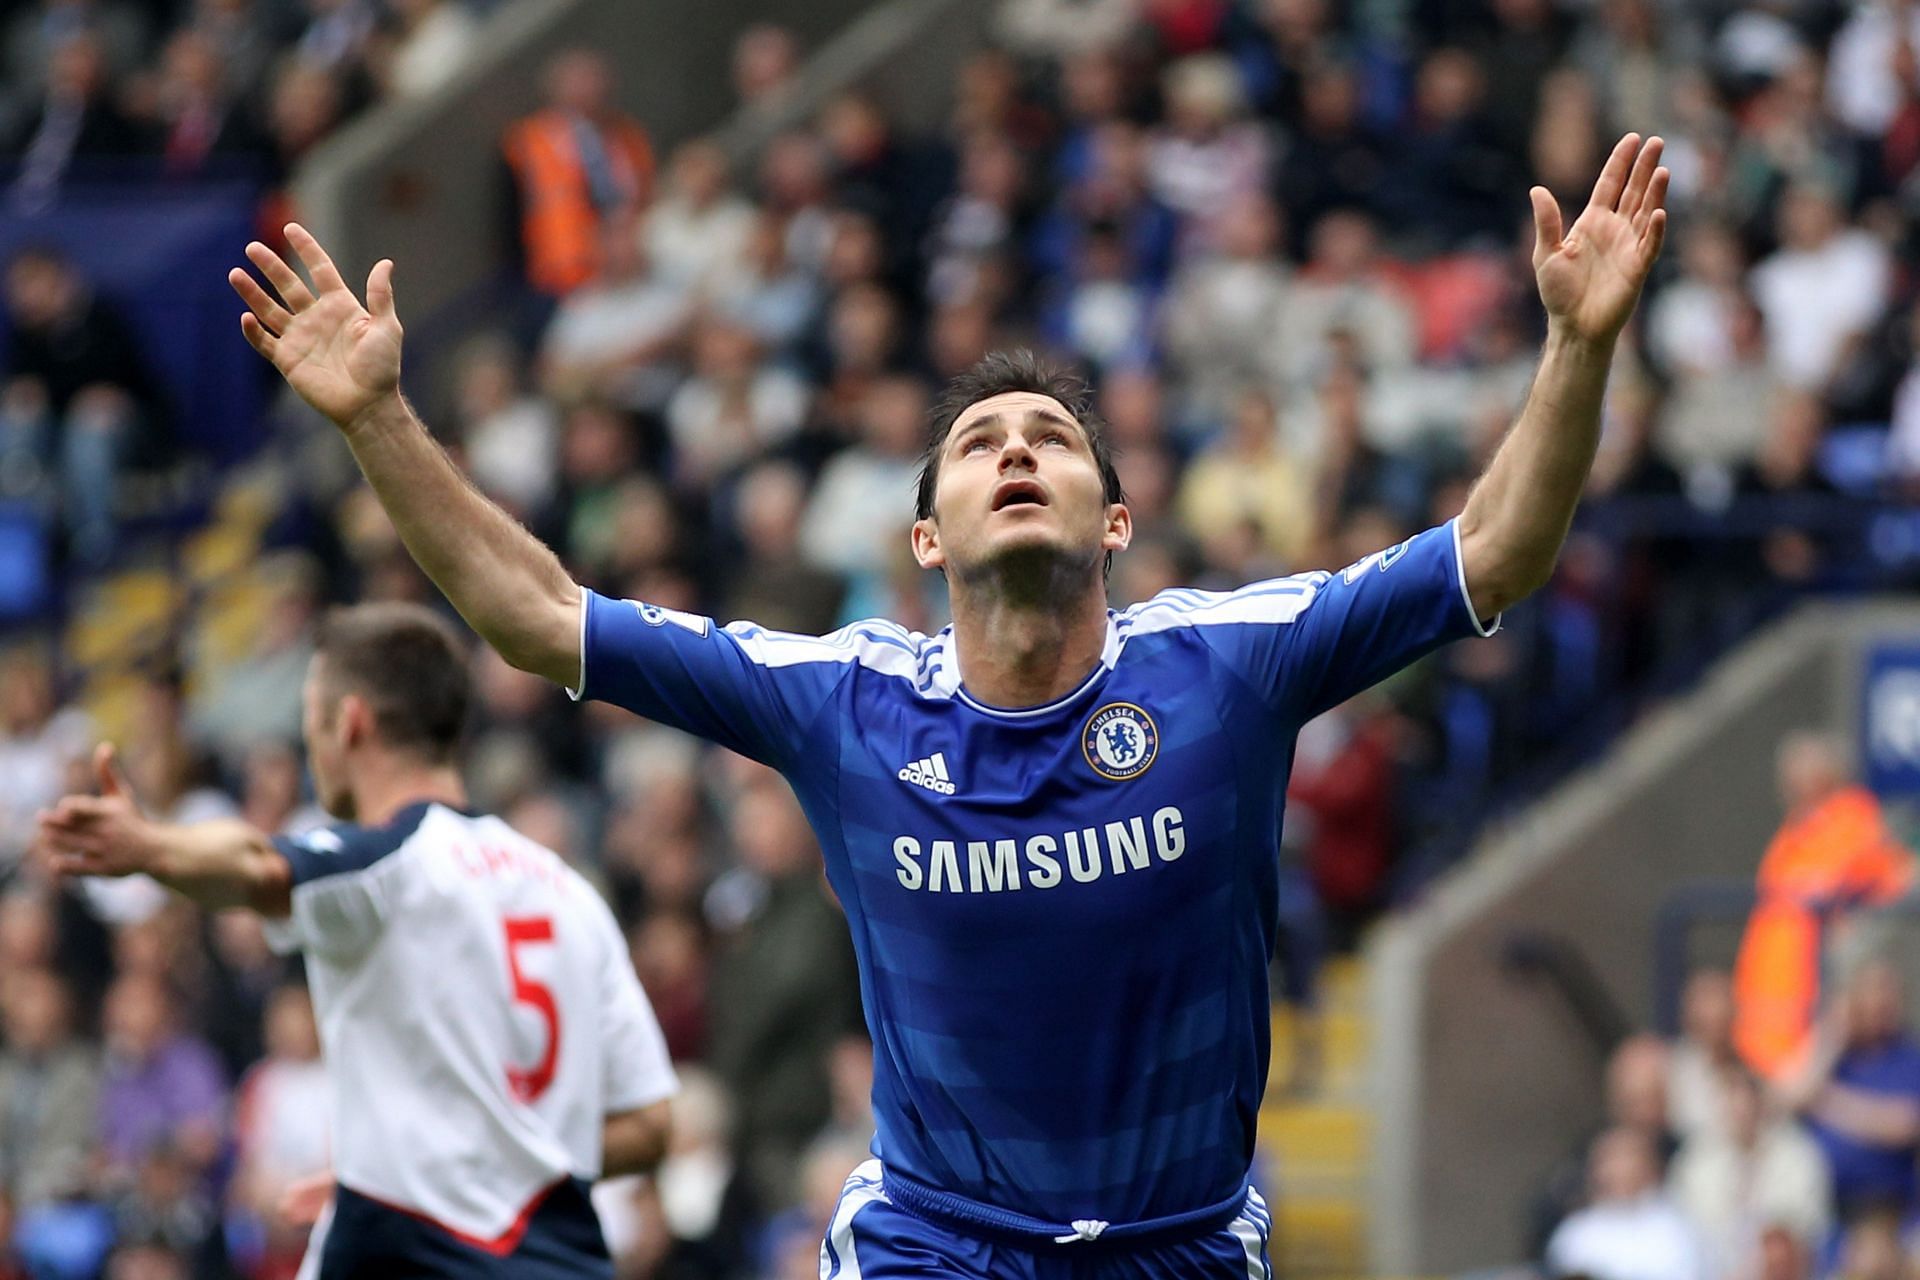 Frank Lampard celebrates against Bolton Wanderers